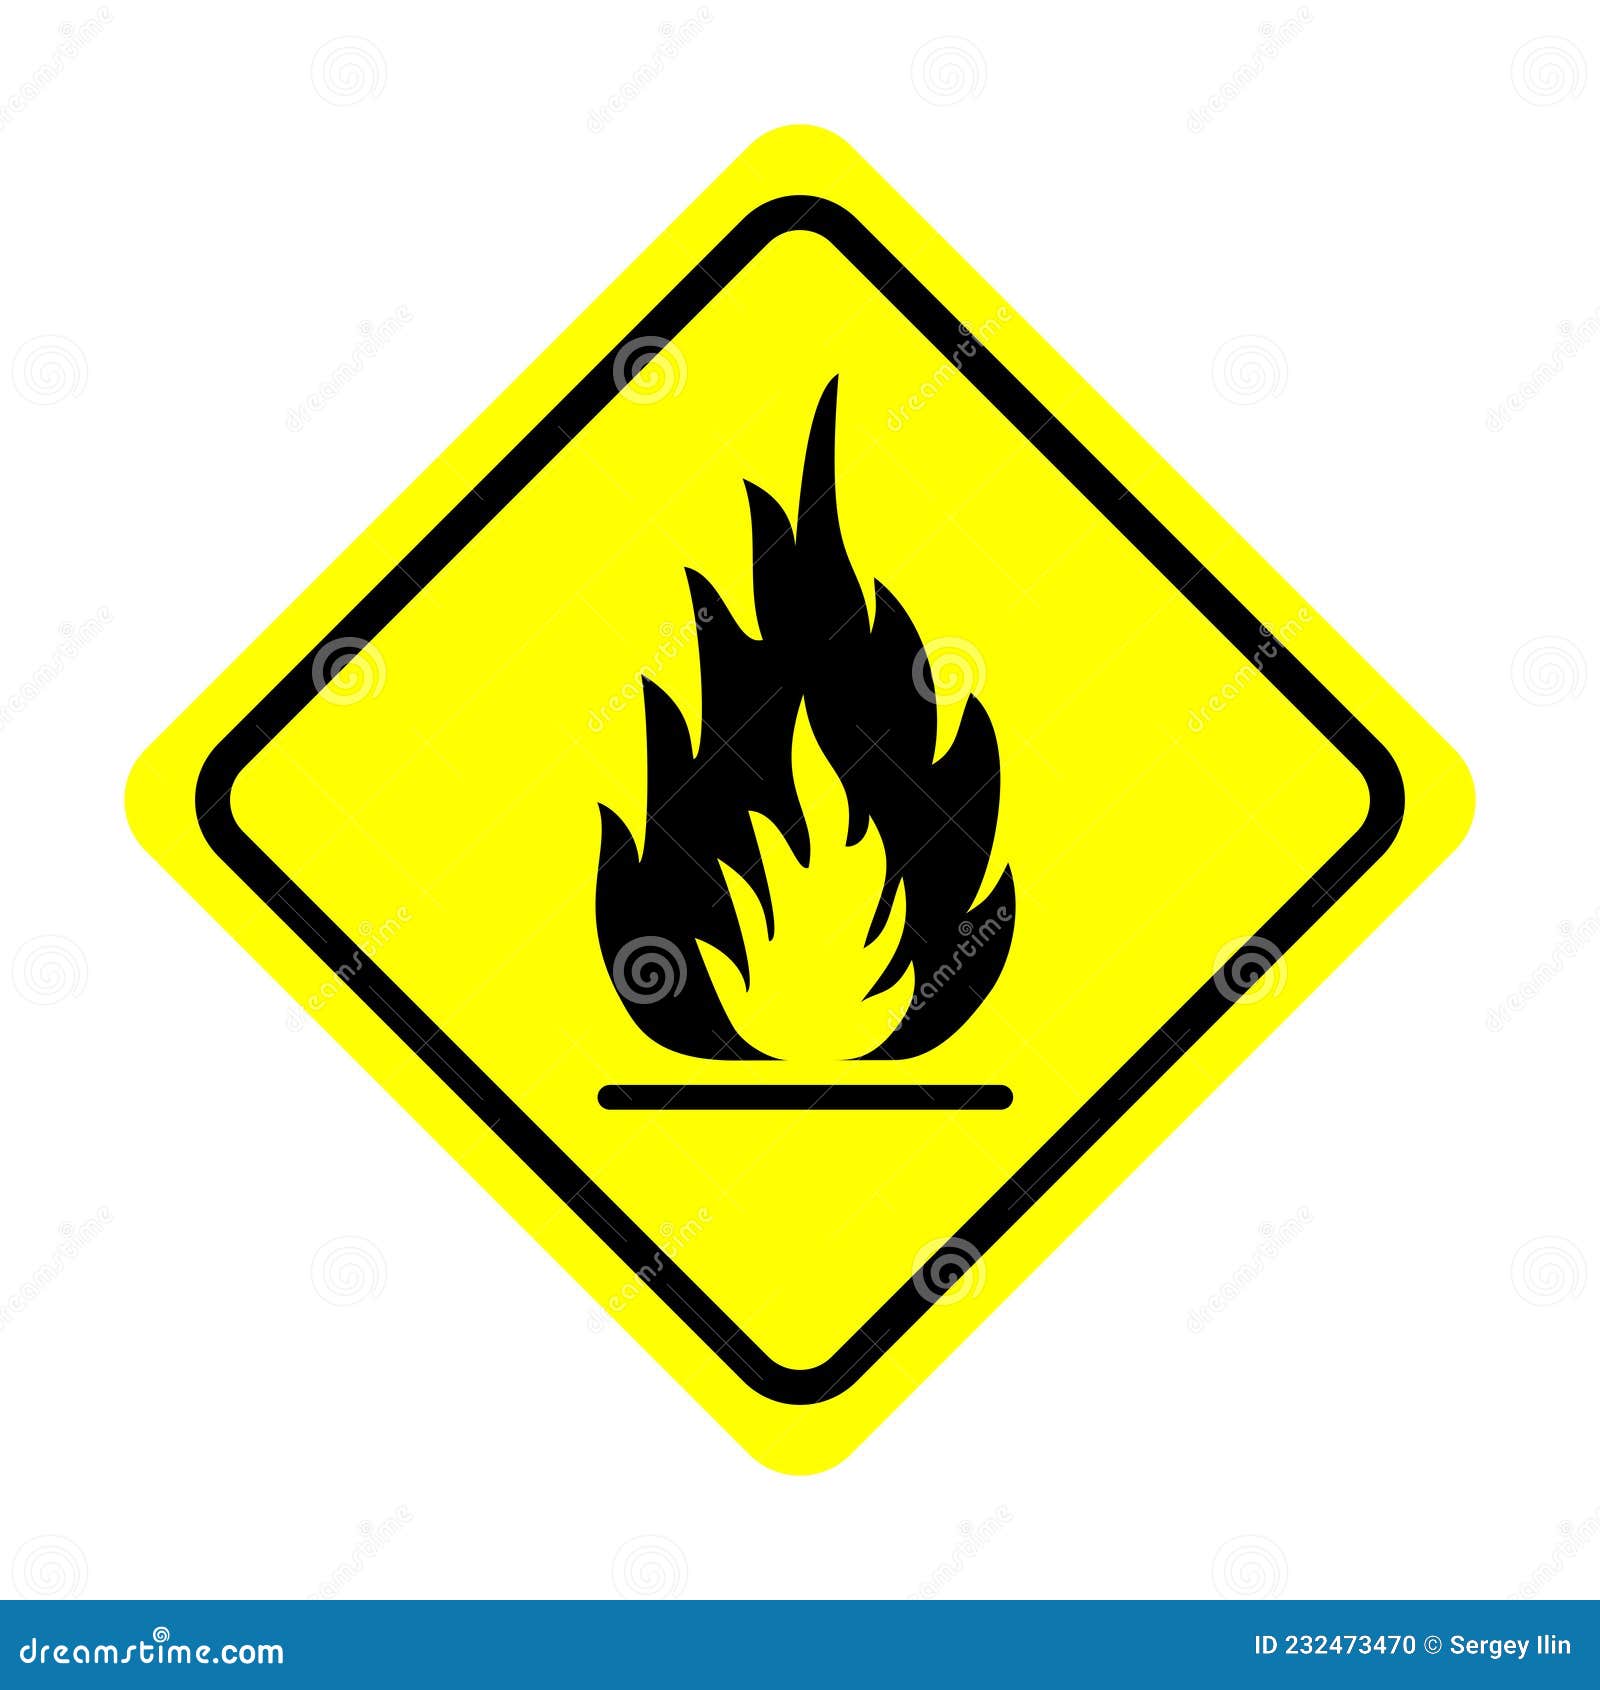 fire warning sign in yellow triangle. flammable, inflammable substances.  